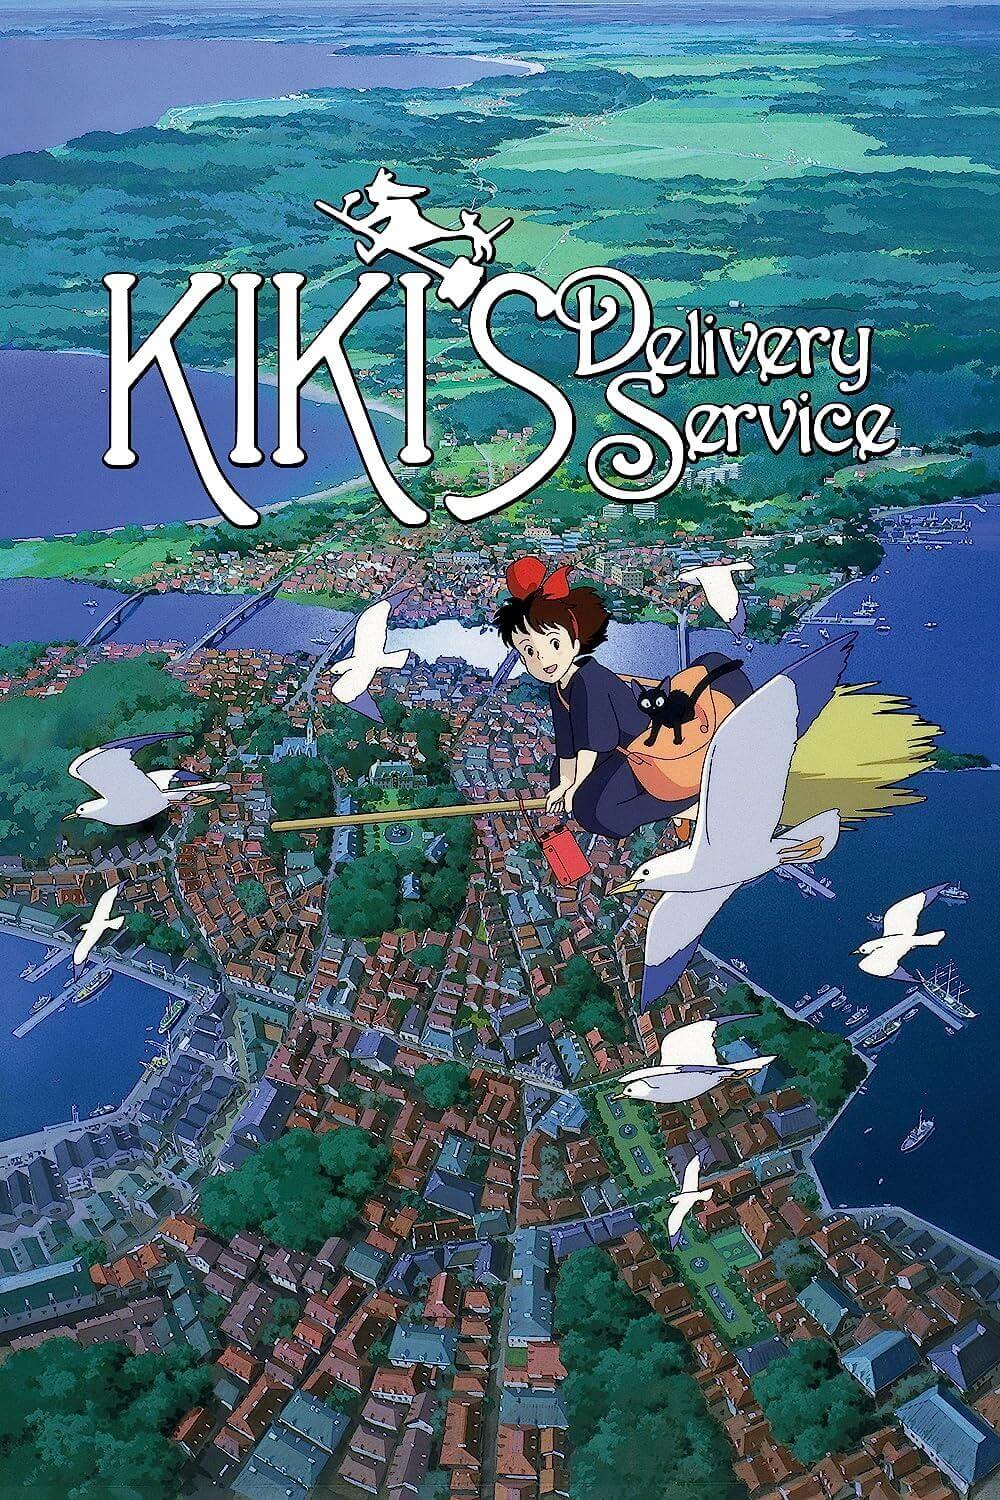 Kiki’s Delivery Service is one of the best rated G movies on Netflix (suitable for 5 year olds).